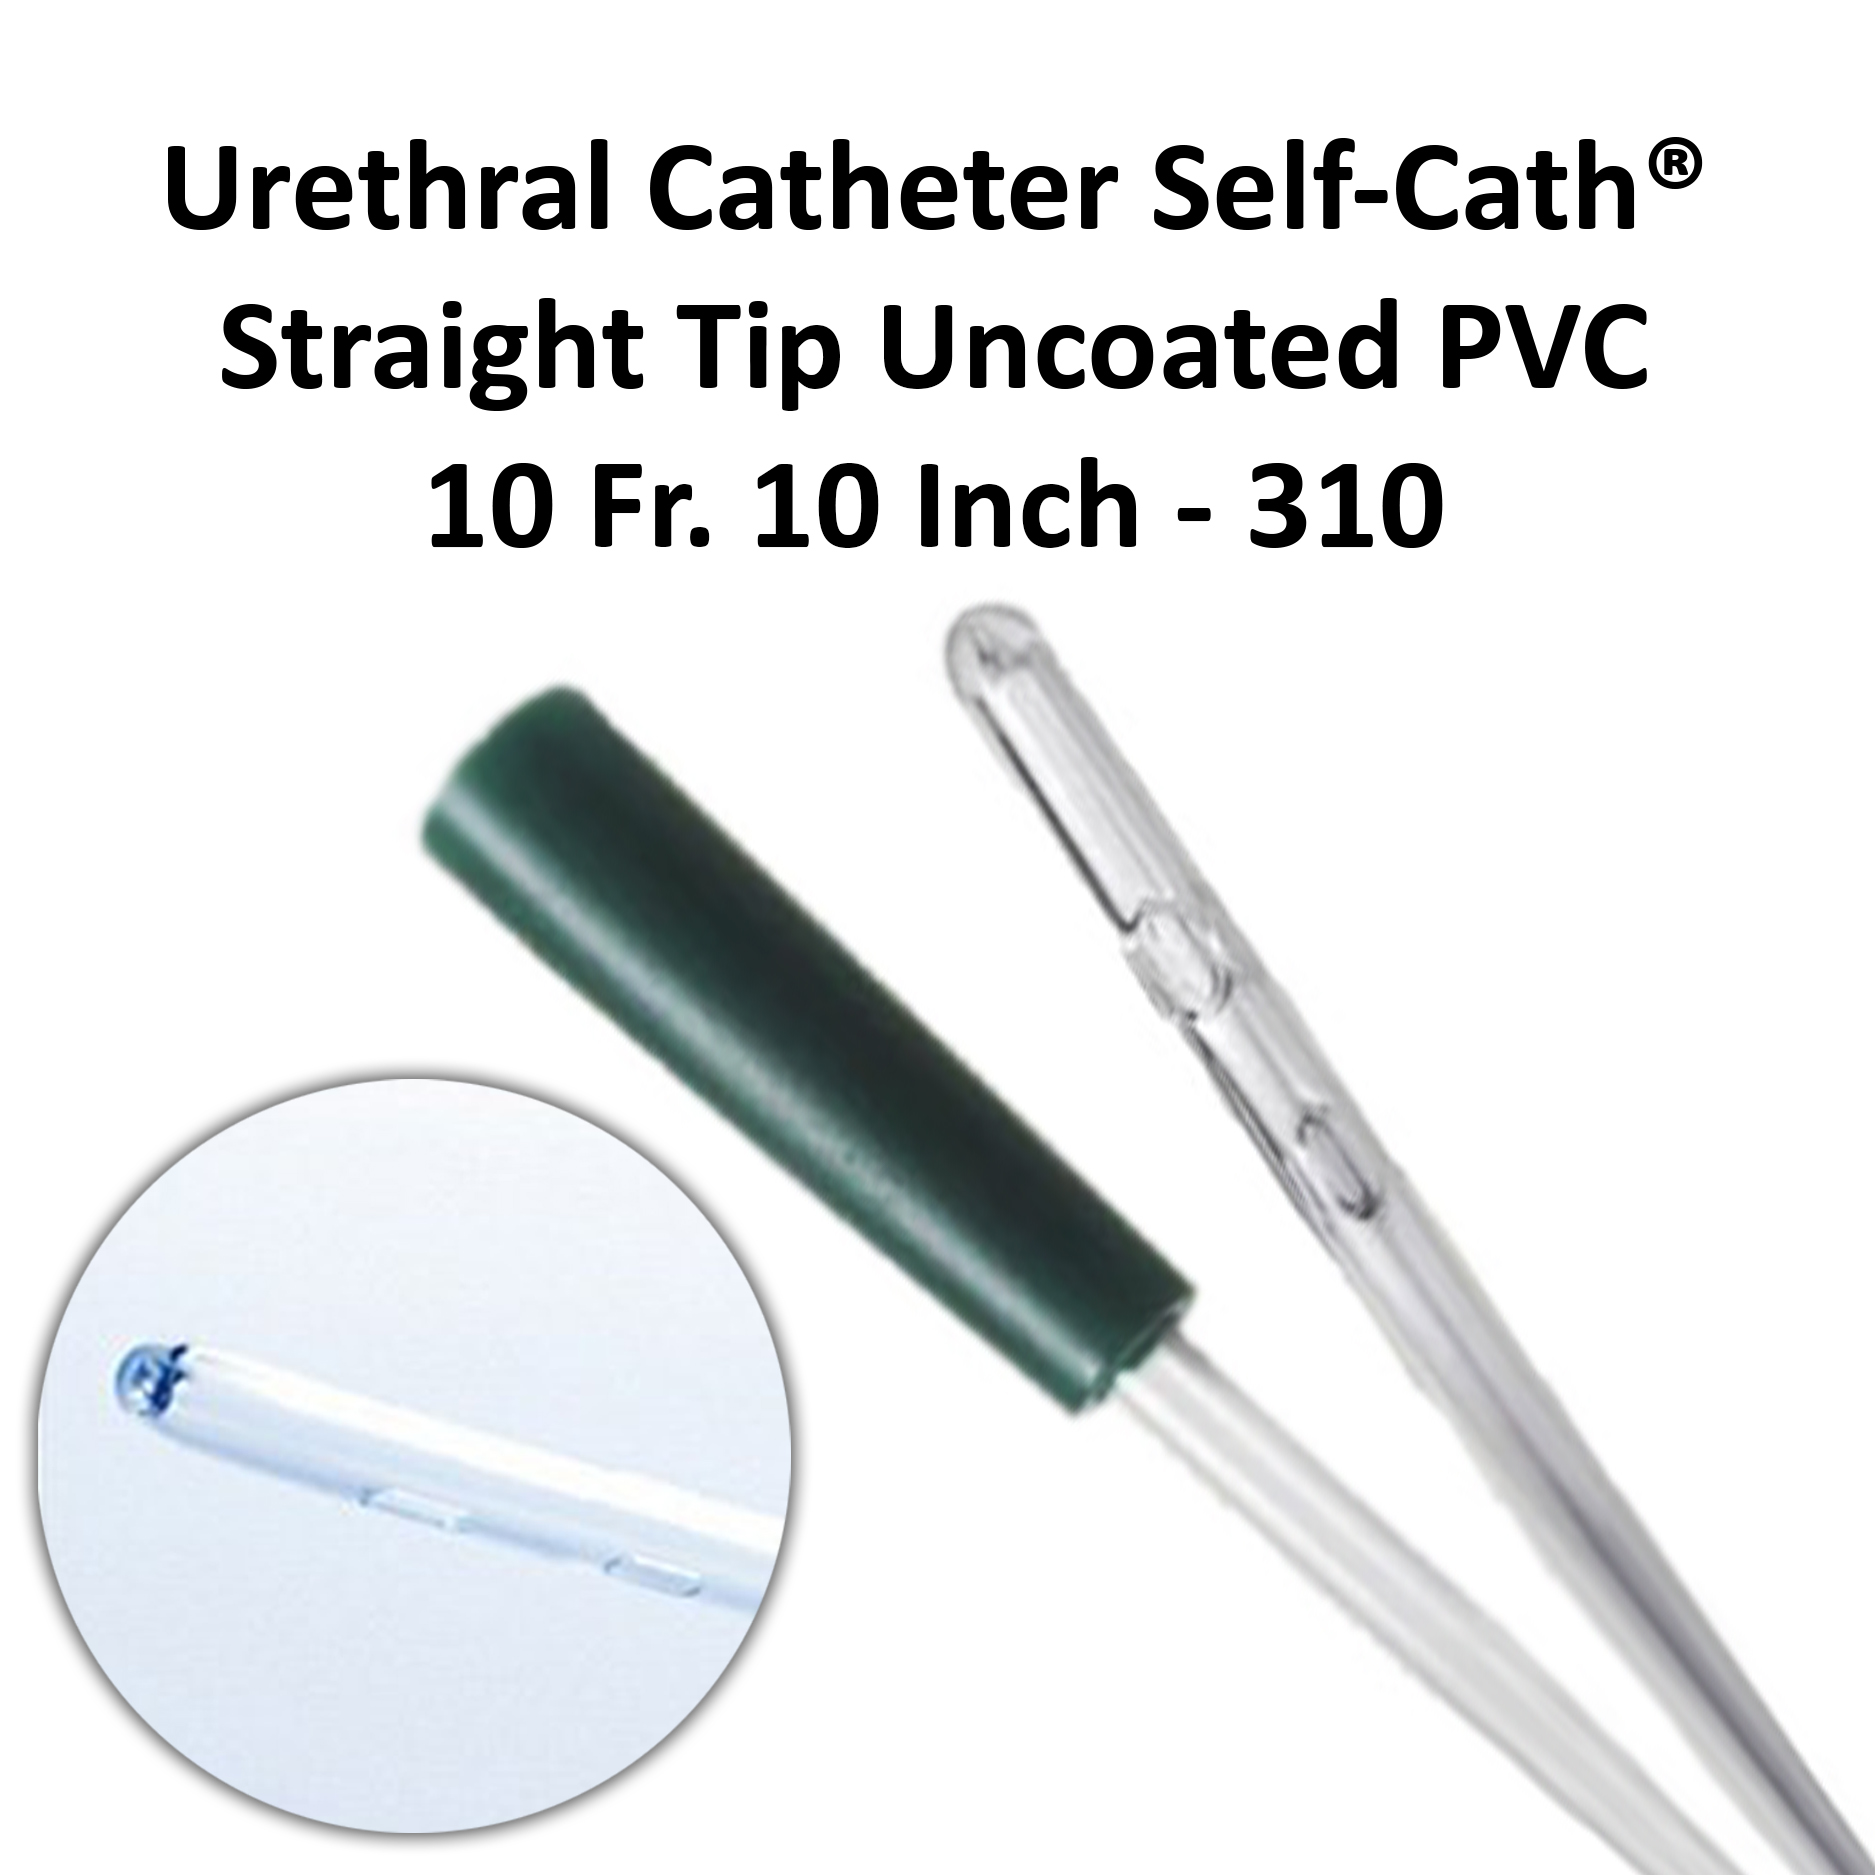 Urethral Catheter Self-Cath Straight Tip Uncoated PVC 10 Fr. 10 Inch - 310